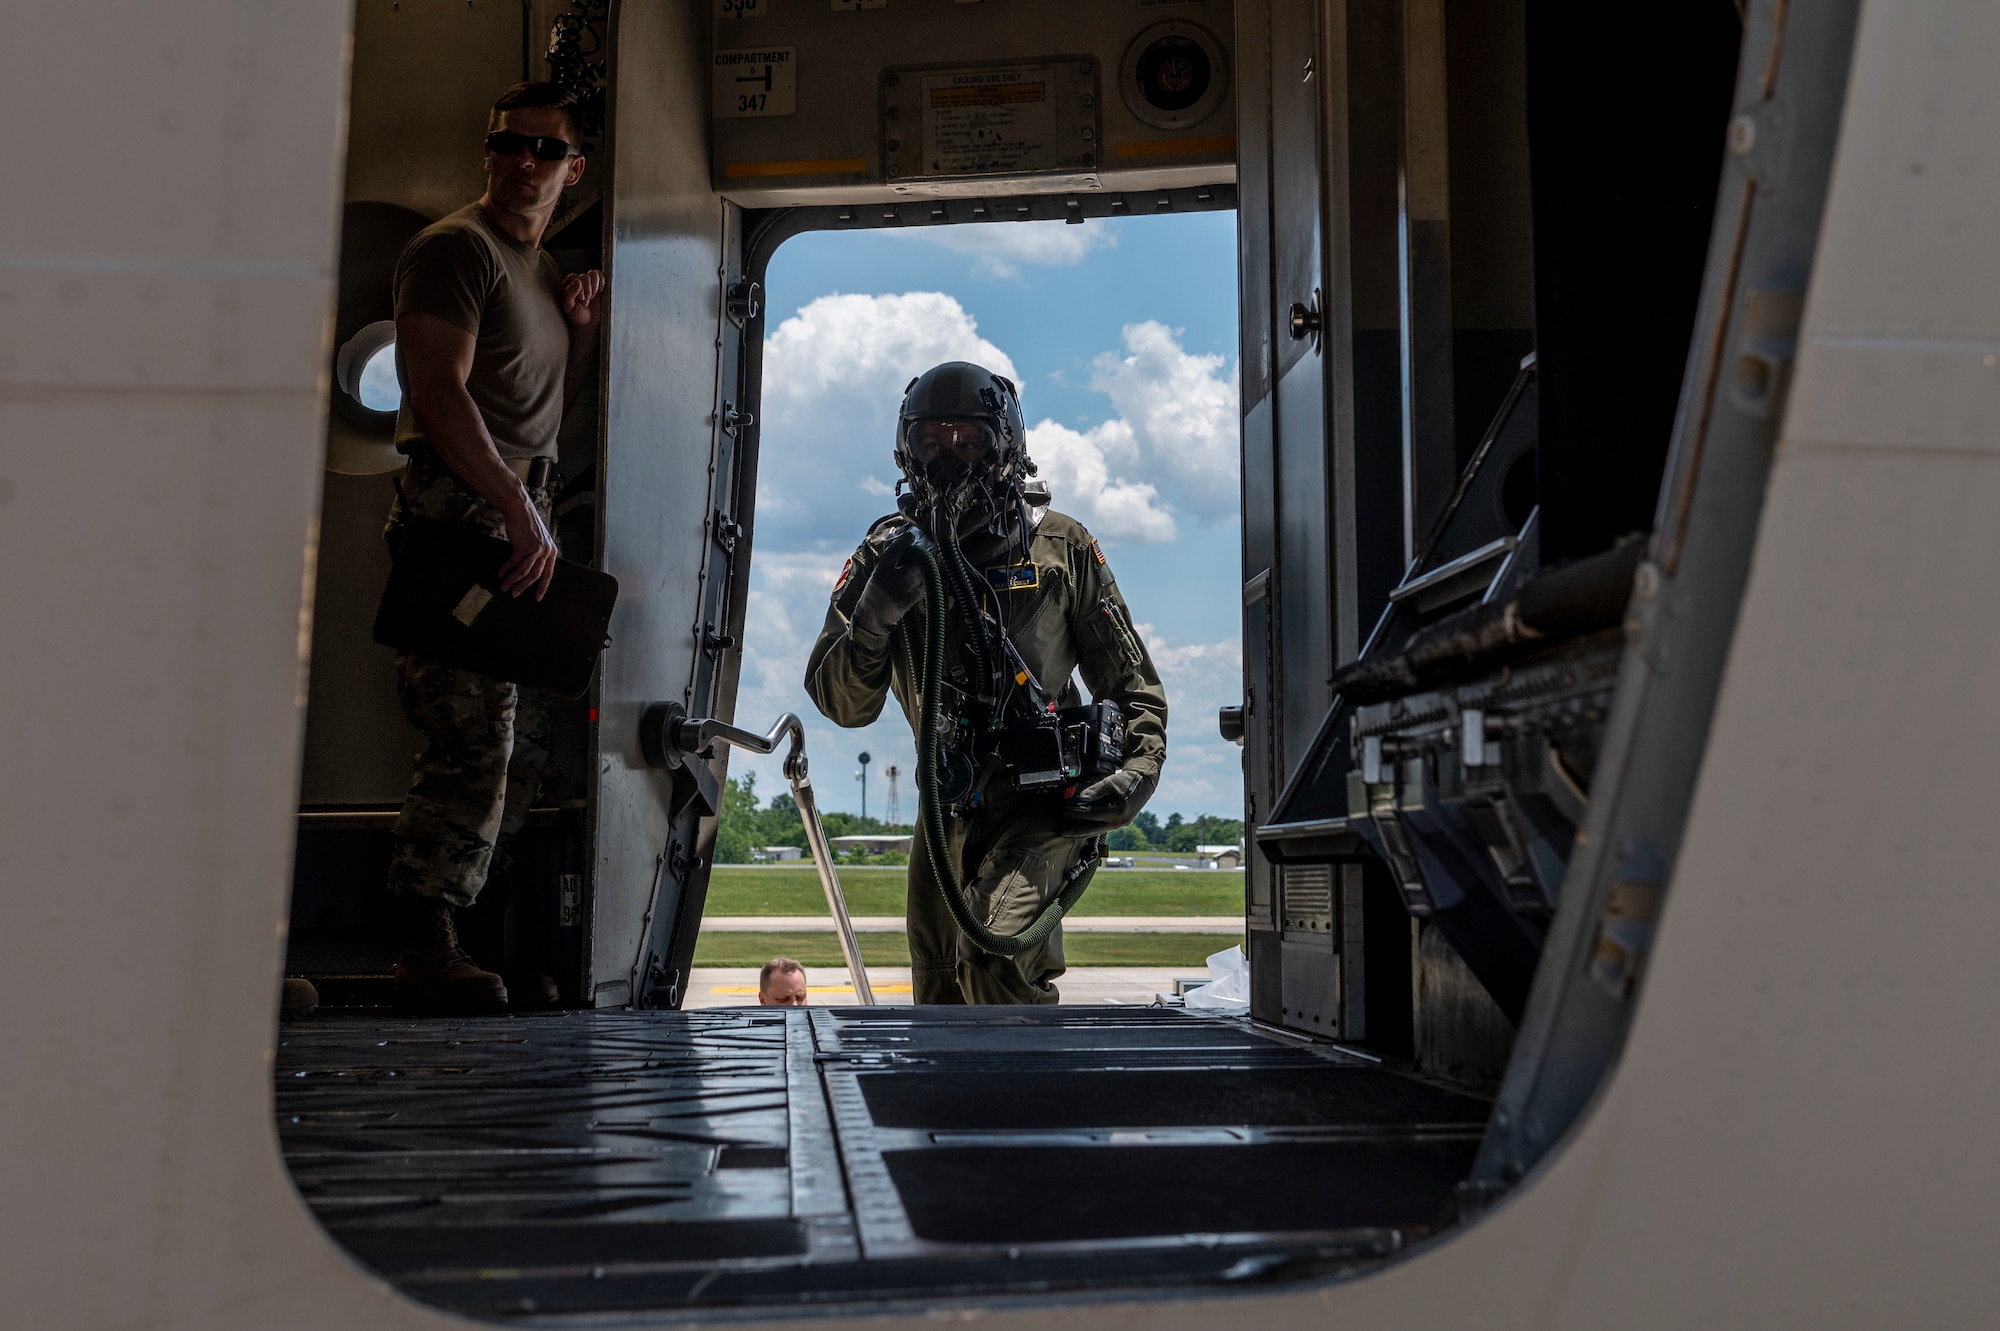 U.S. Air Force Captain Alex Kenney, a pilot with the 167th Airlift Squadron, boards a C-17 Globemaster III aircraft during a simulated chemical environment training at the 167th Airlift Wing, Martinsburg, West Virginia, June 10, 2022. This training included maintainers, loadmasters, pilots and other personnel to simulate the process of preparing, loading and flying the aircraft while in a hazardous chemical environment